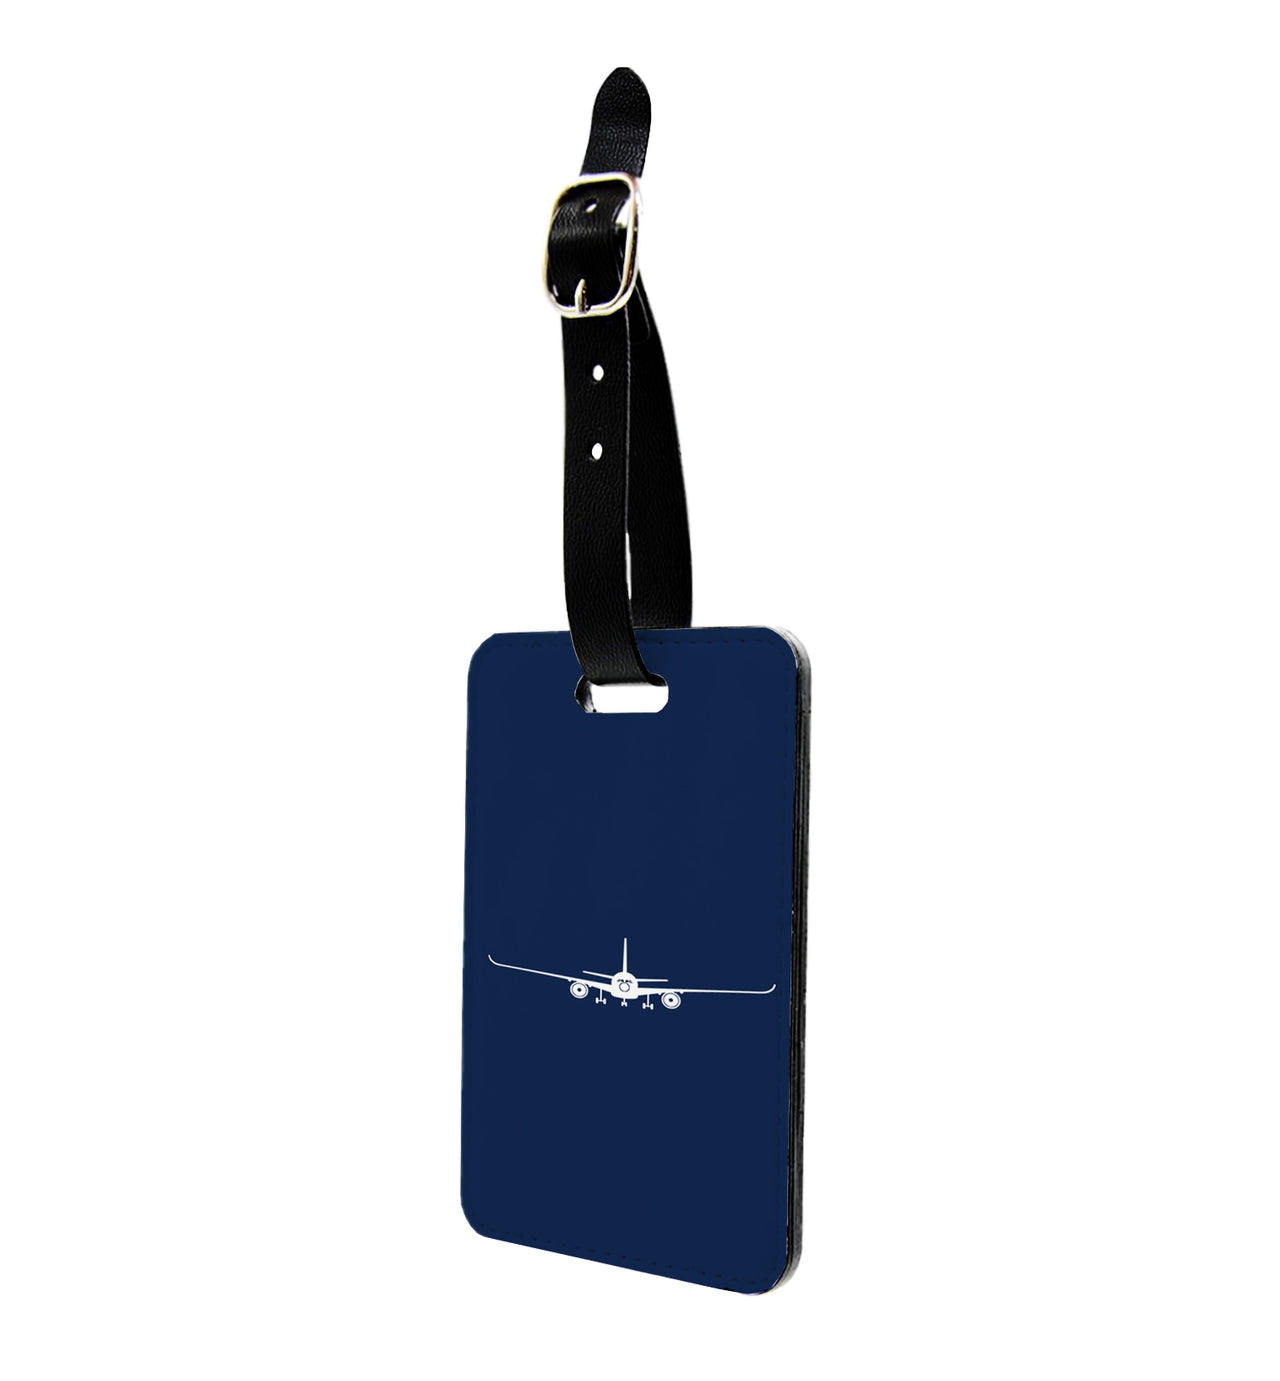 Airbus A350 Silhouette Designed Luggage Tag